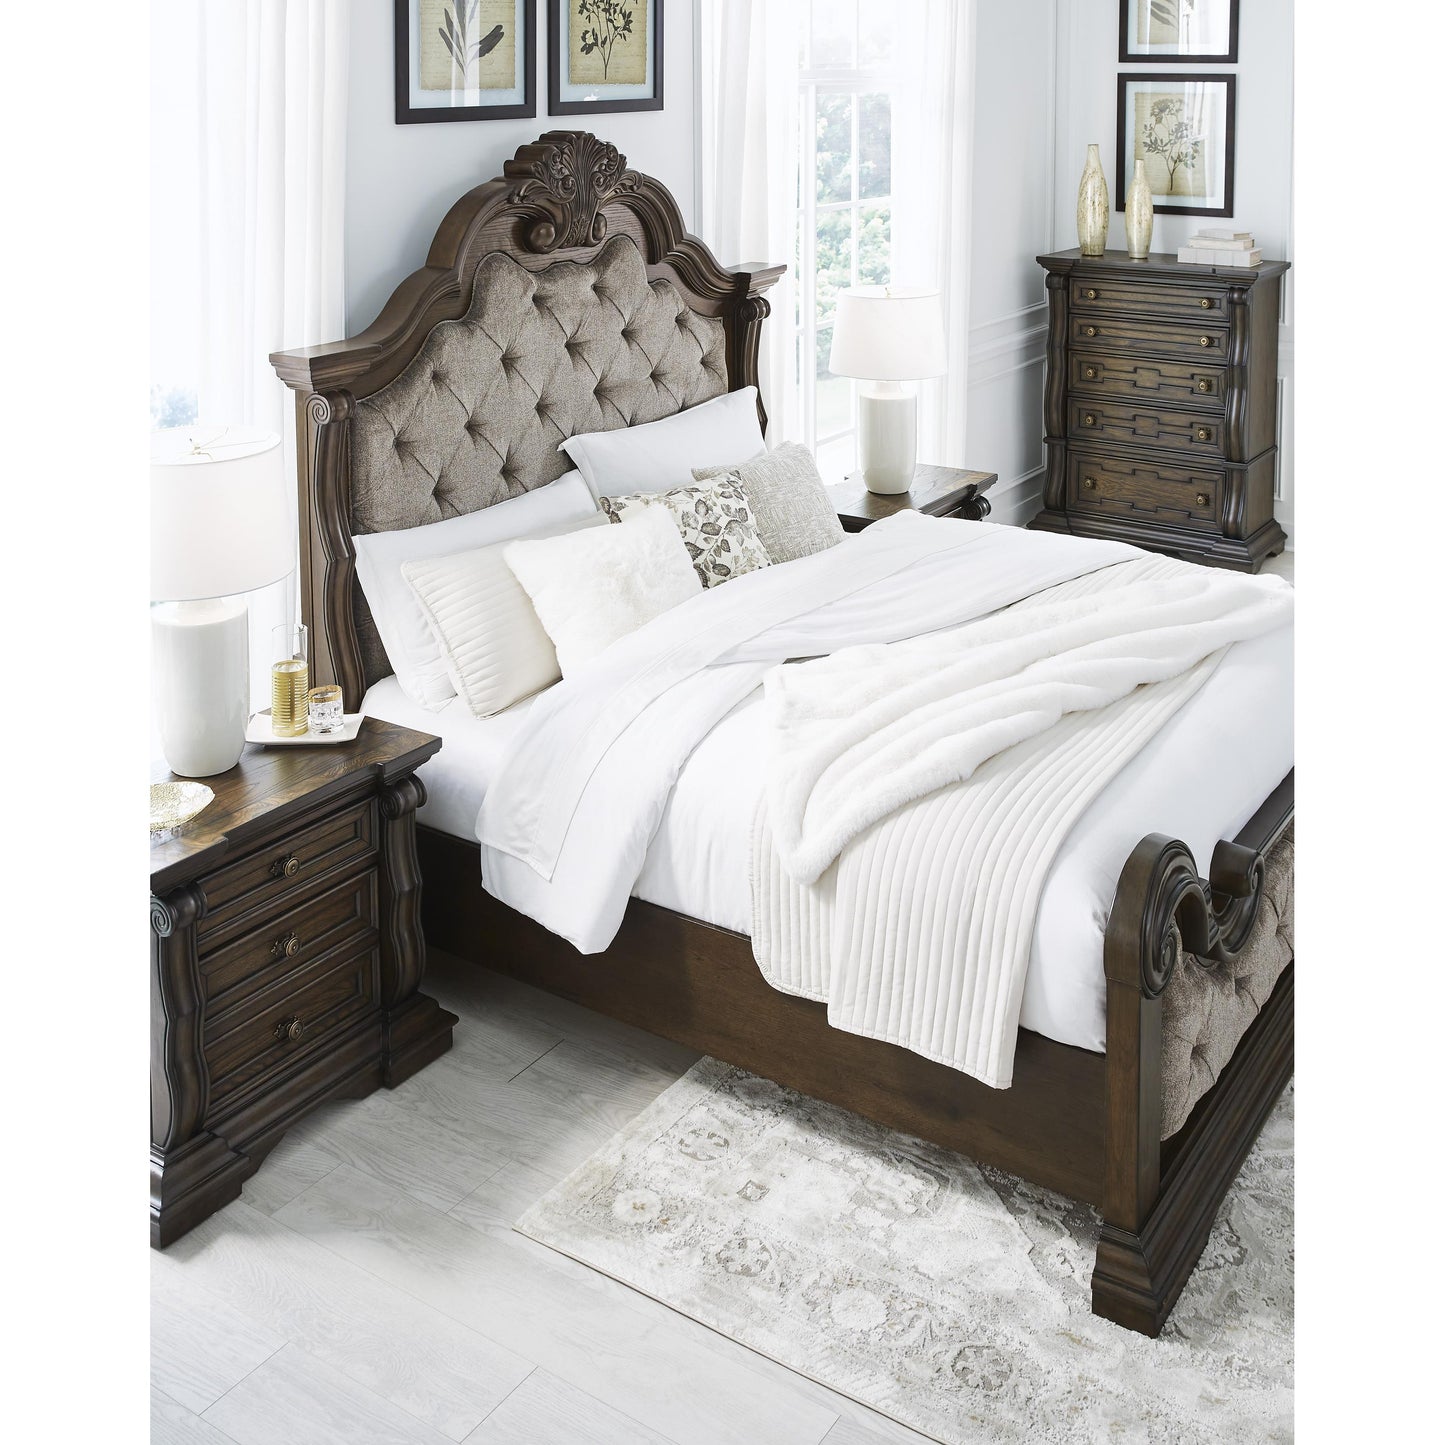 Signature Design by Ashley Maylee California King Upholstered Bed B947-58/B947-56/B947-94 IMAGE 8